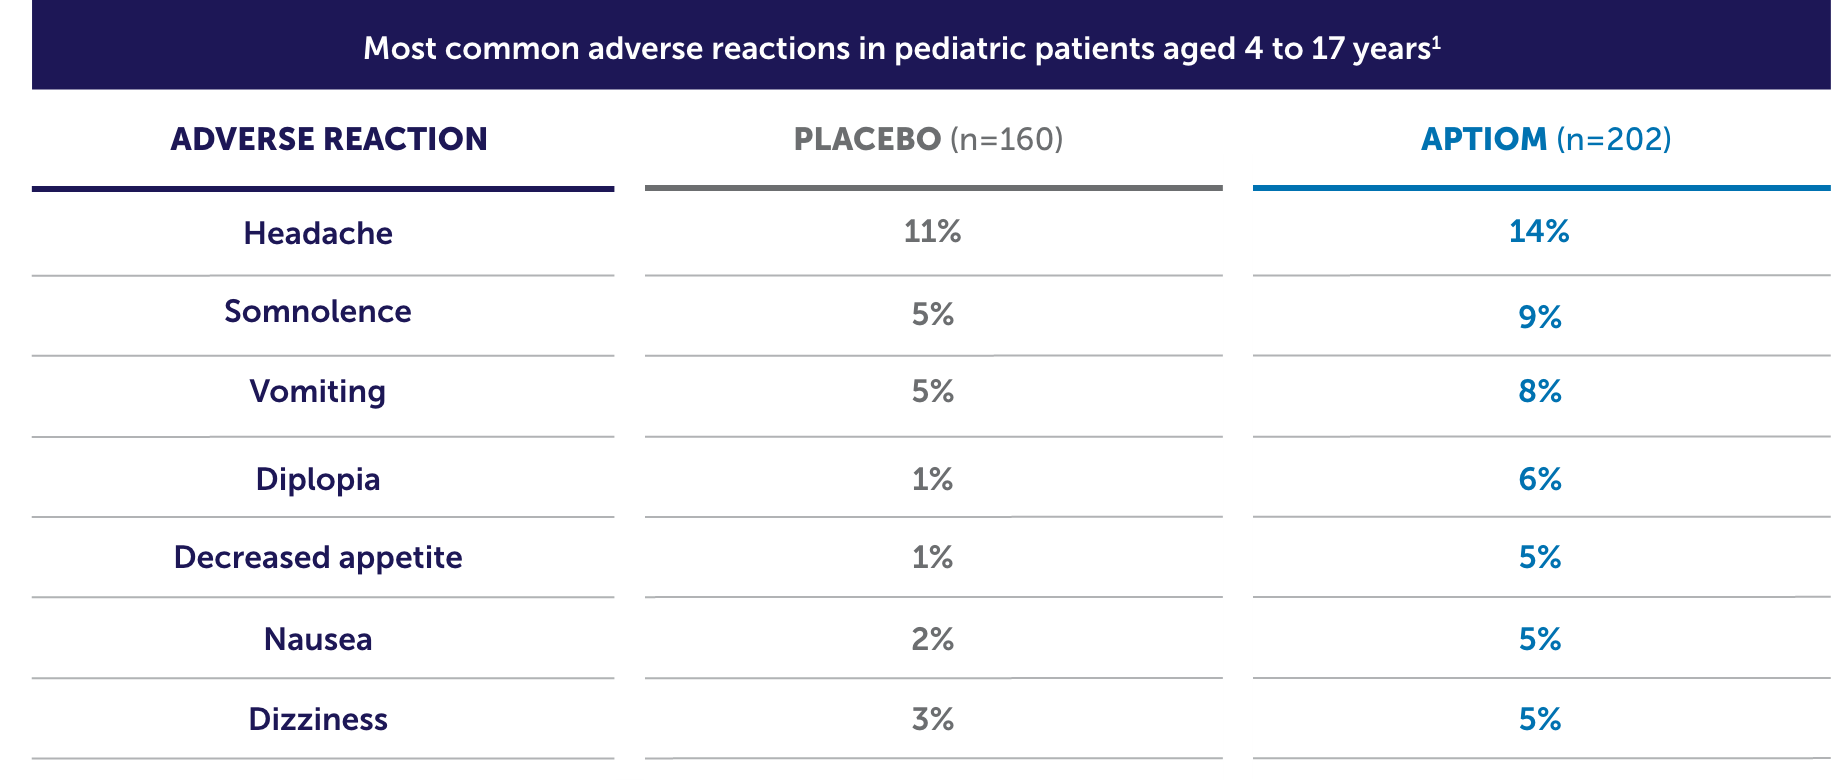 Most common adverse reactions in pediatric patients